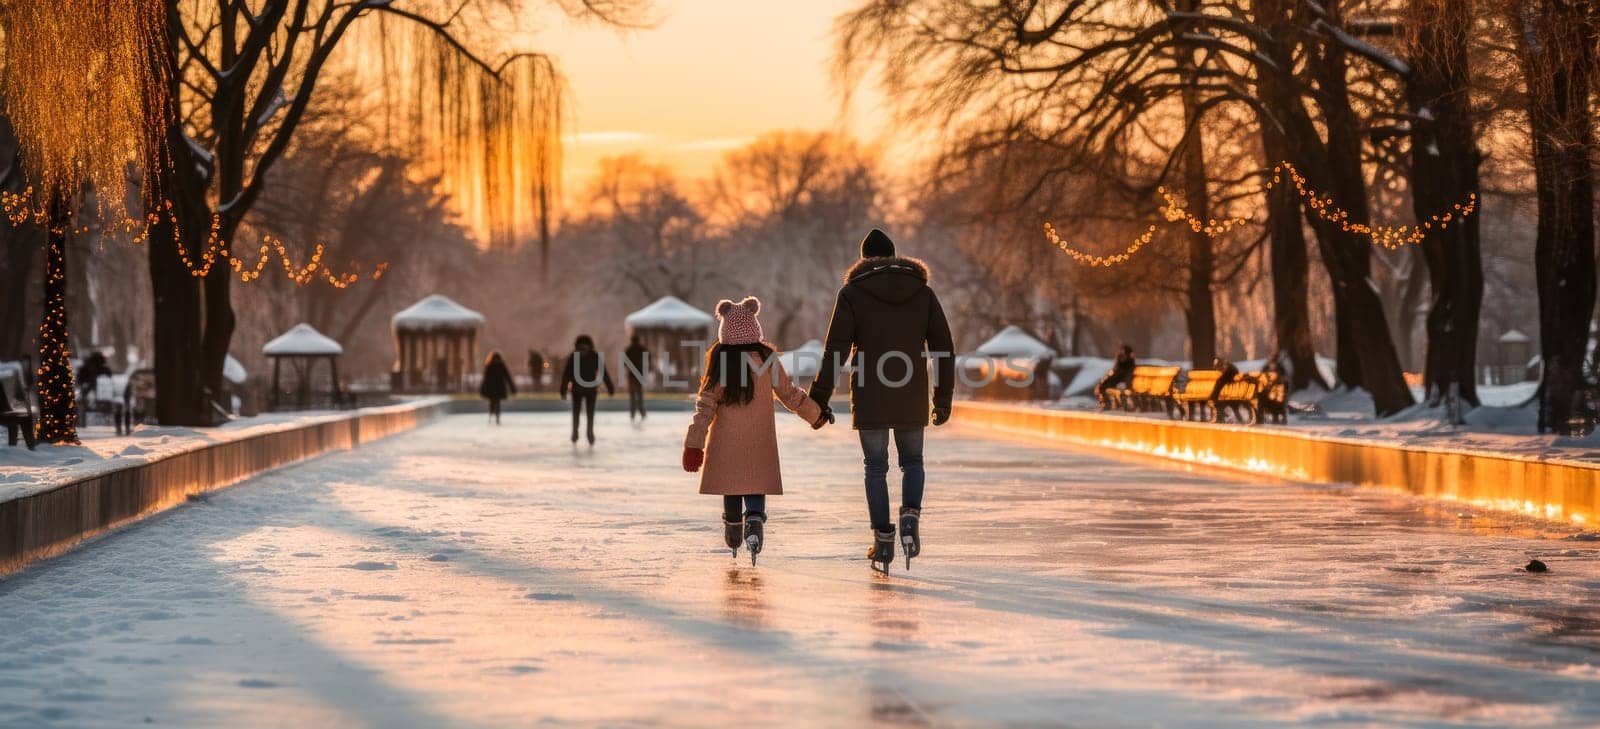 An unforgettable winter atmosphere brings joy to dad and daughter skating. Family moments filled with smiles.